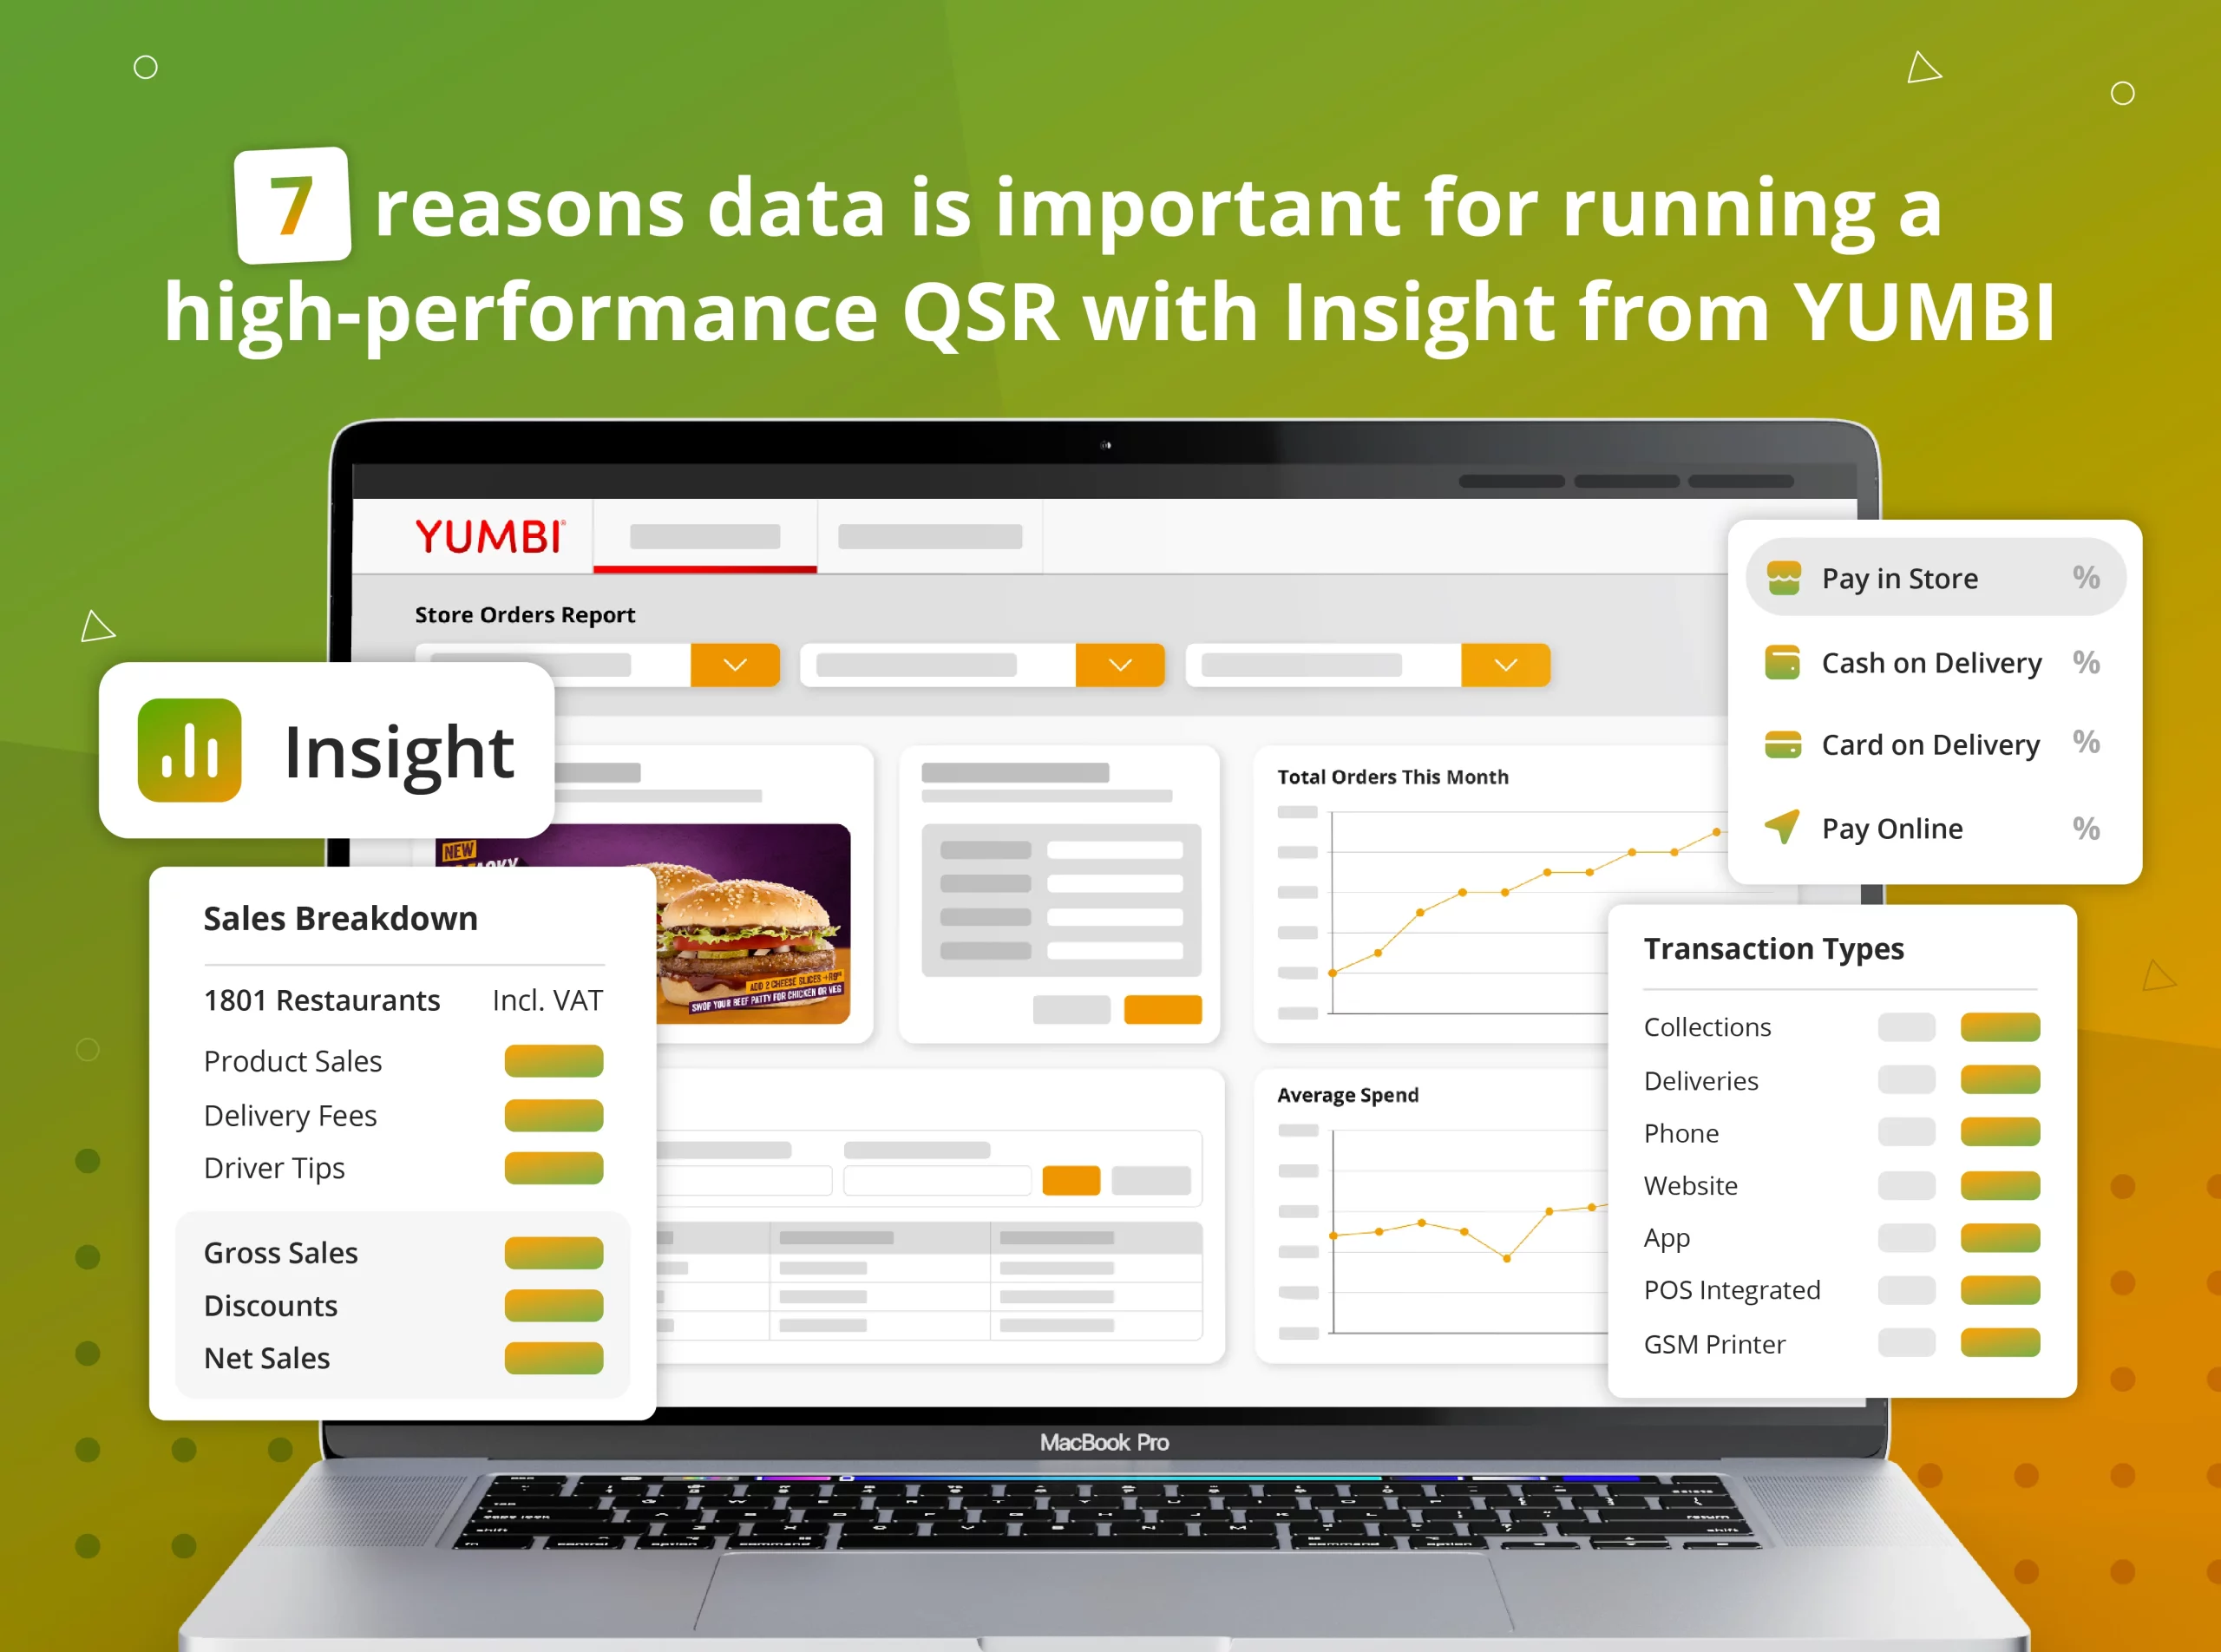 7 reasons data is important for running a high-performance QSR with Insight from YUMBI